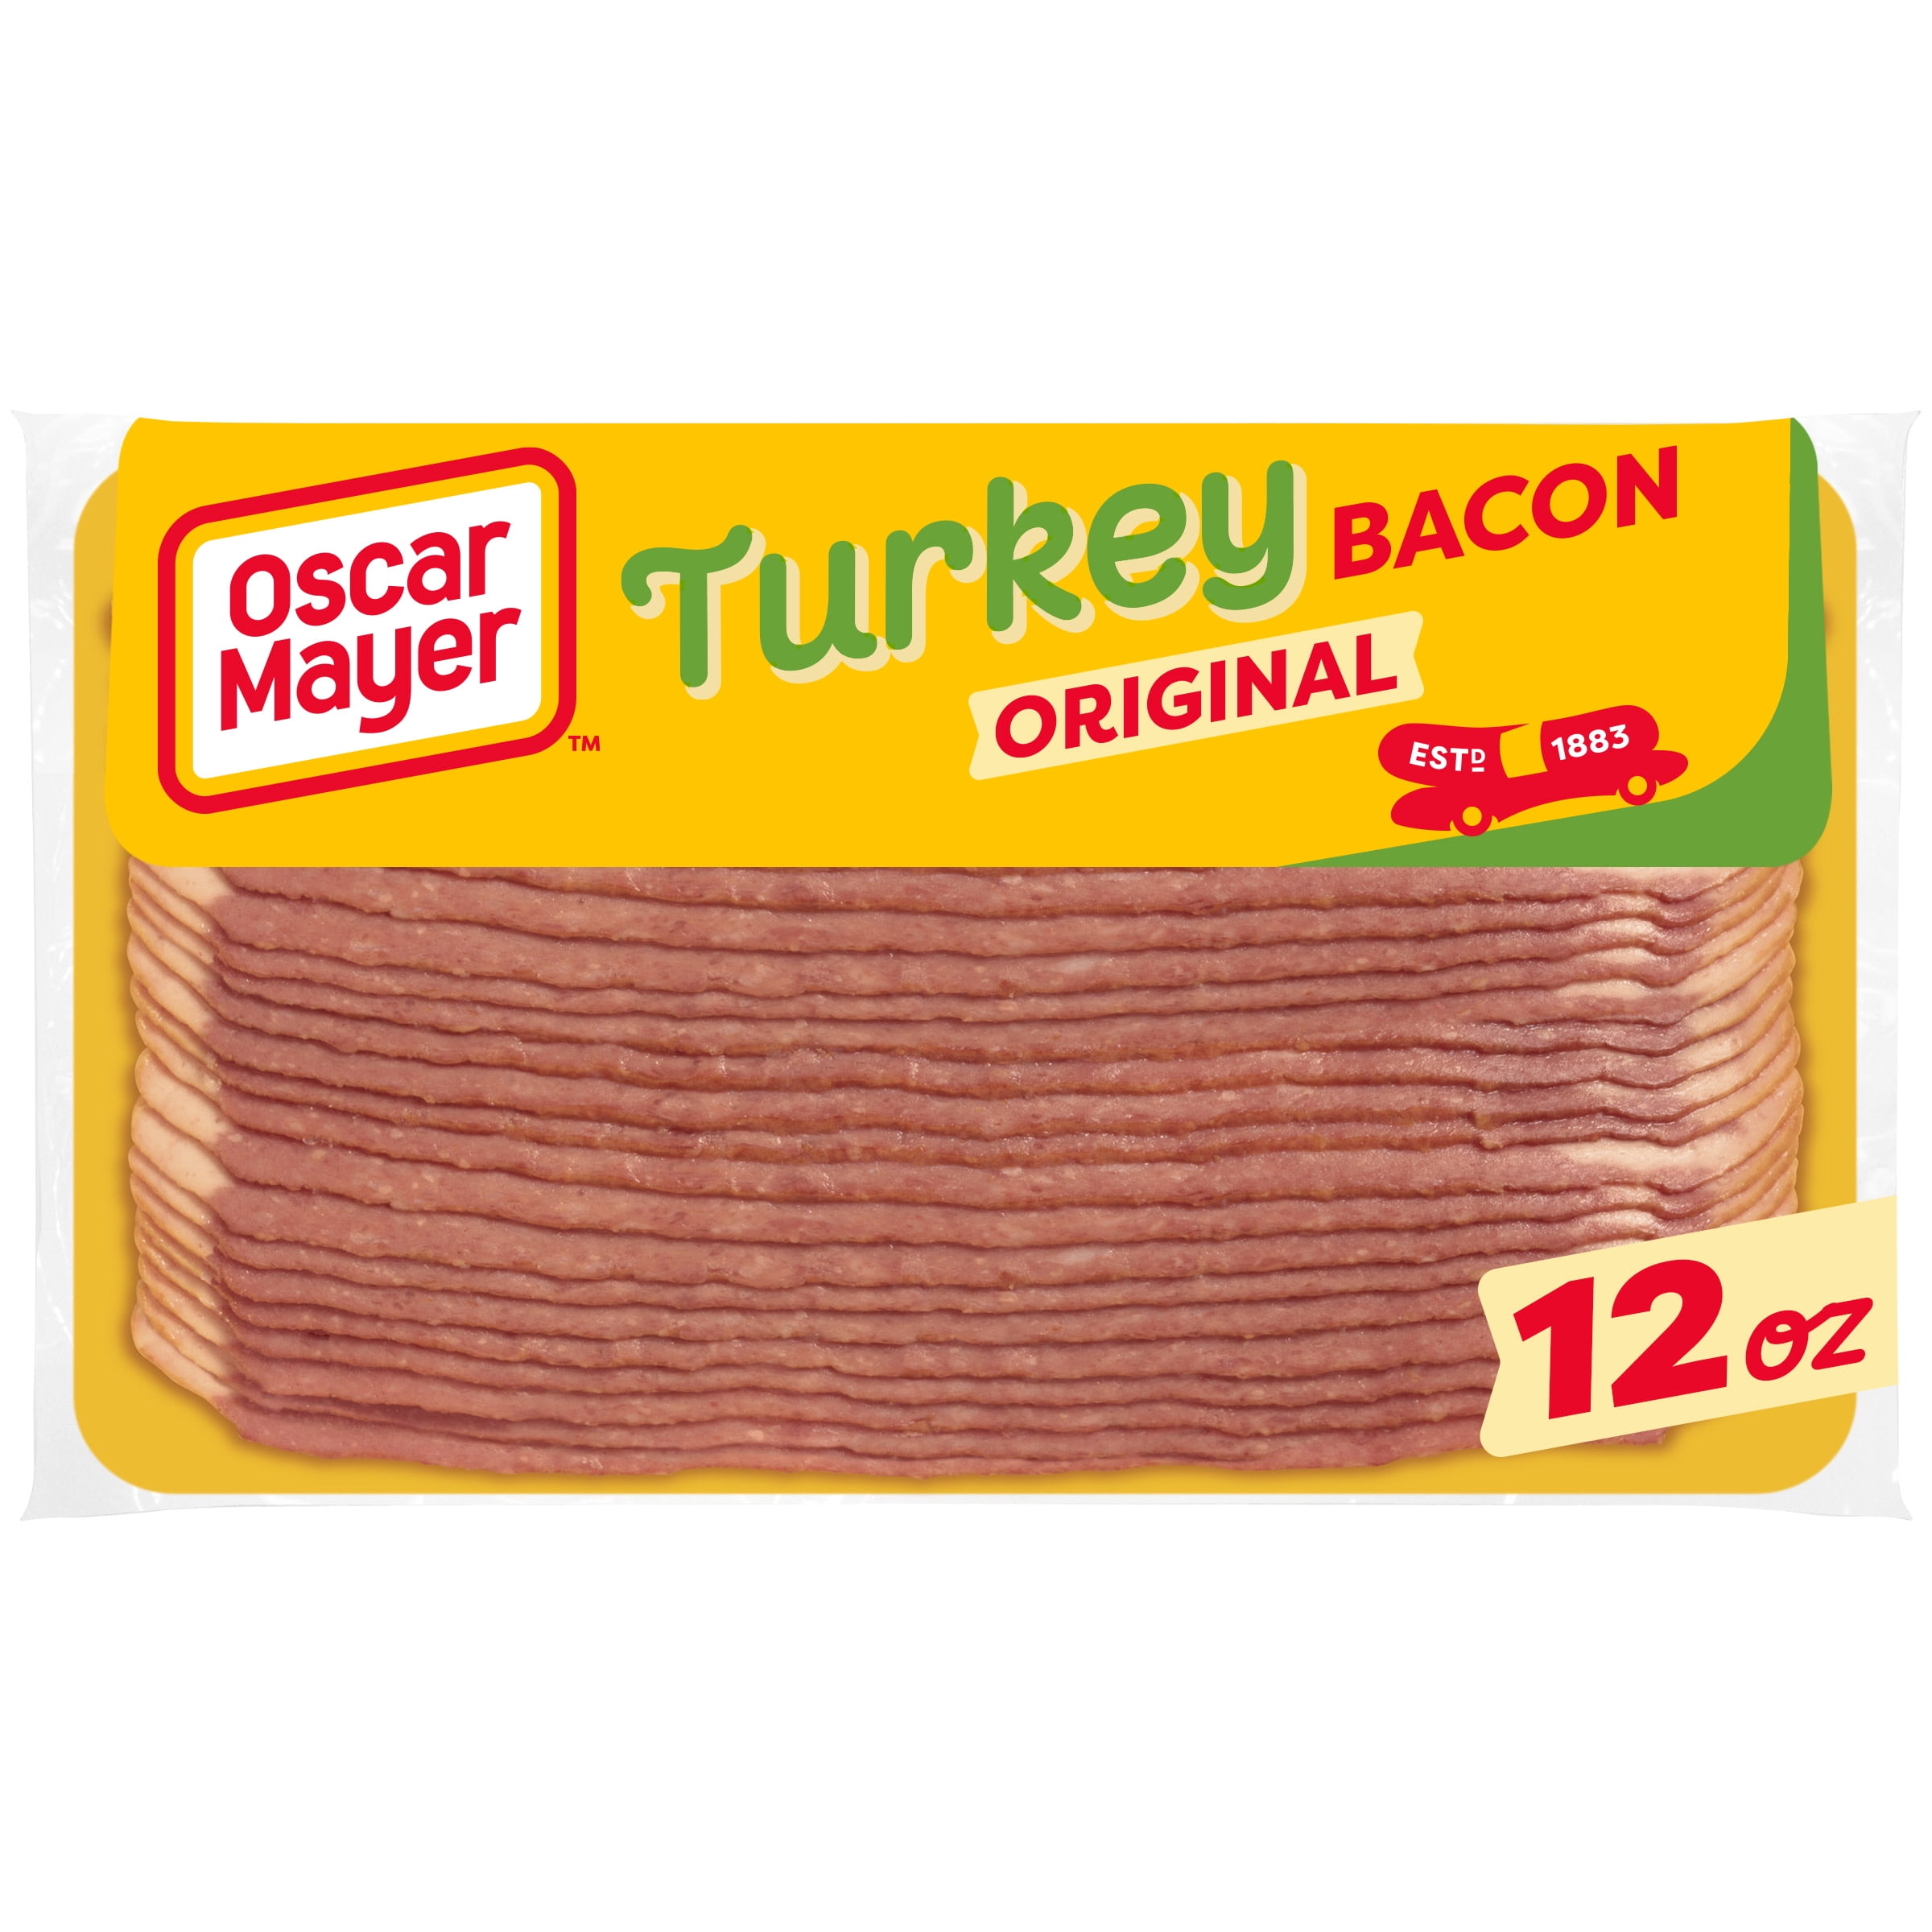 Oscar Mayer Gluten Free Turkey Bacon with 58% Less Fat & 57% Less Sodium, 12 oz Pack, 21-23 Slices